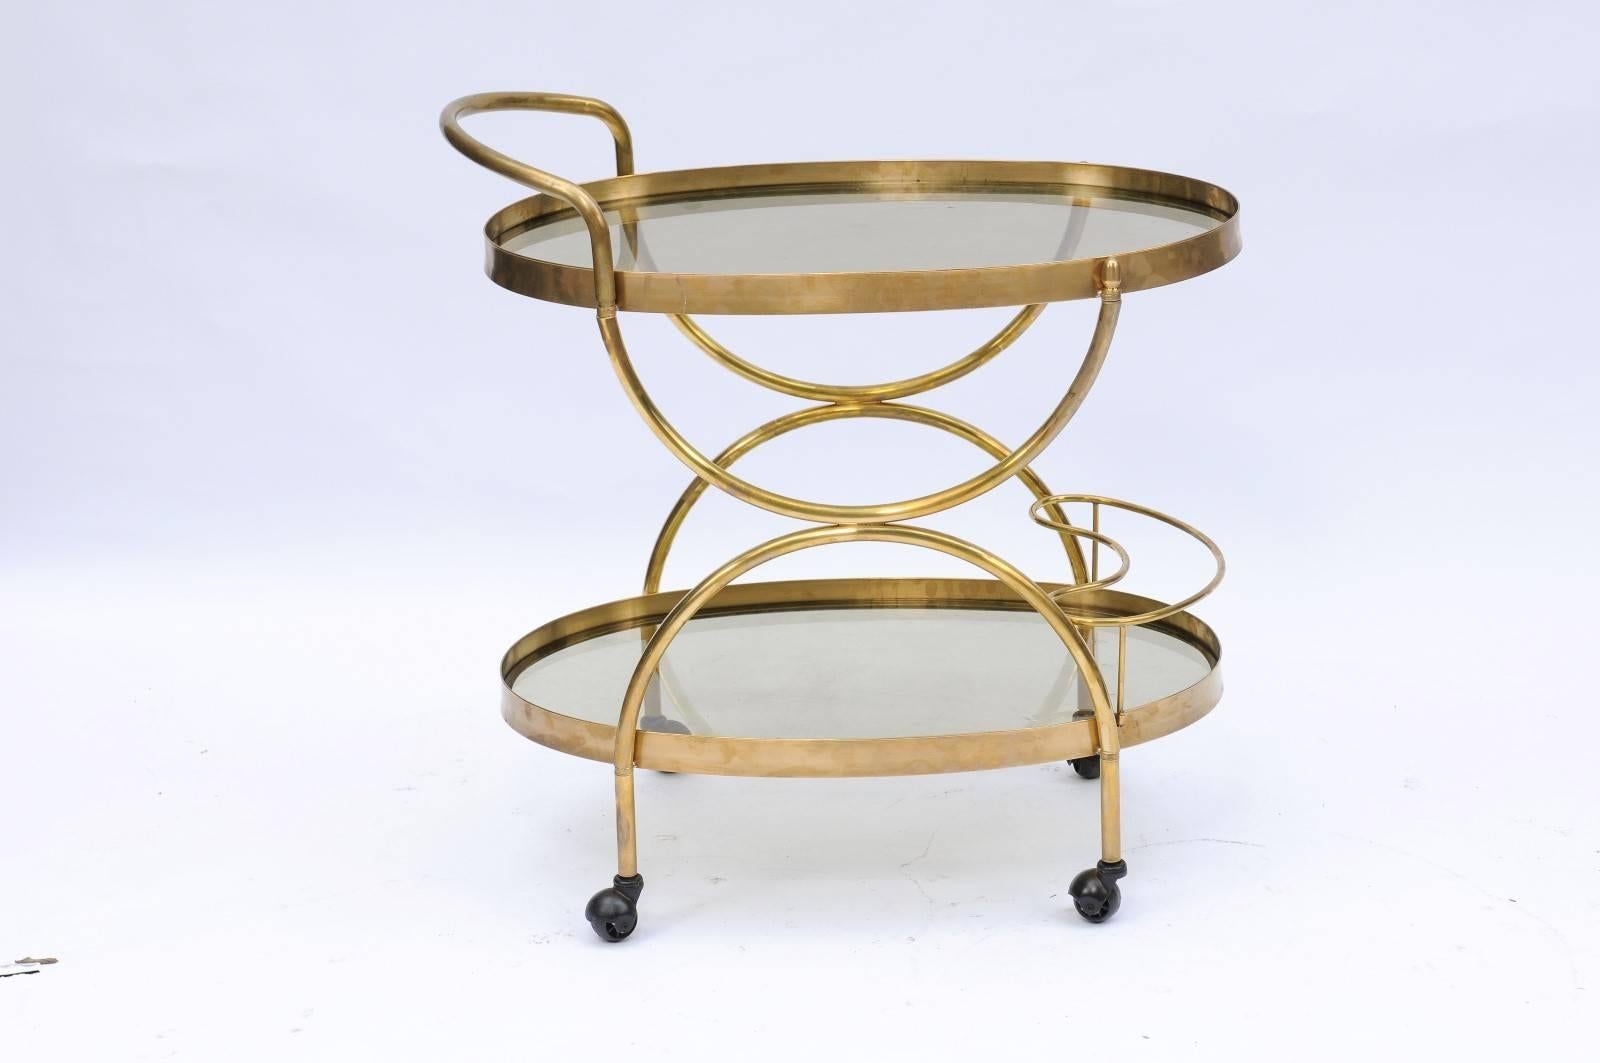 An Italian Mid-Century Modern oval two-tiered brass and glass bar cart with half-moon supports and smoky glass from 1950s, Florence. We are always looking for unusual bar carts that can double as consoles or gorgeous stand-alone bars, so when we